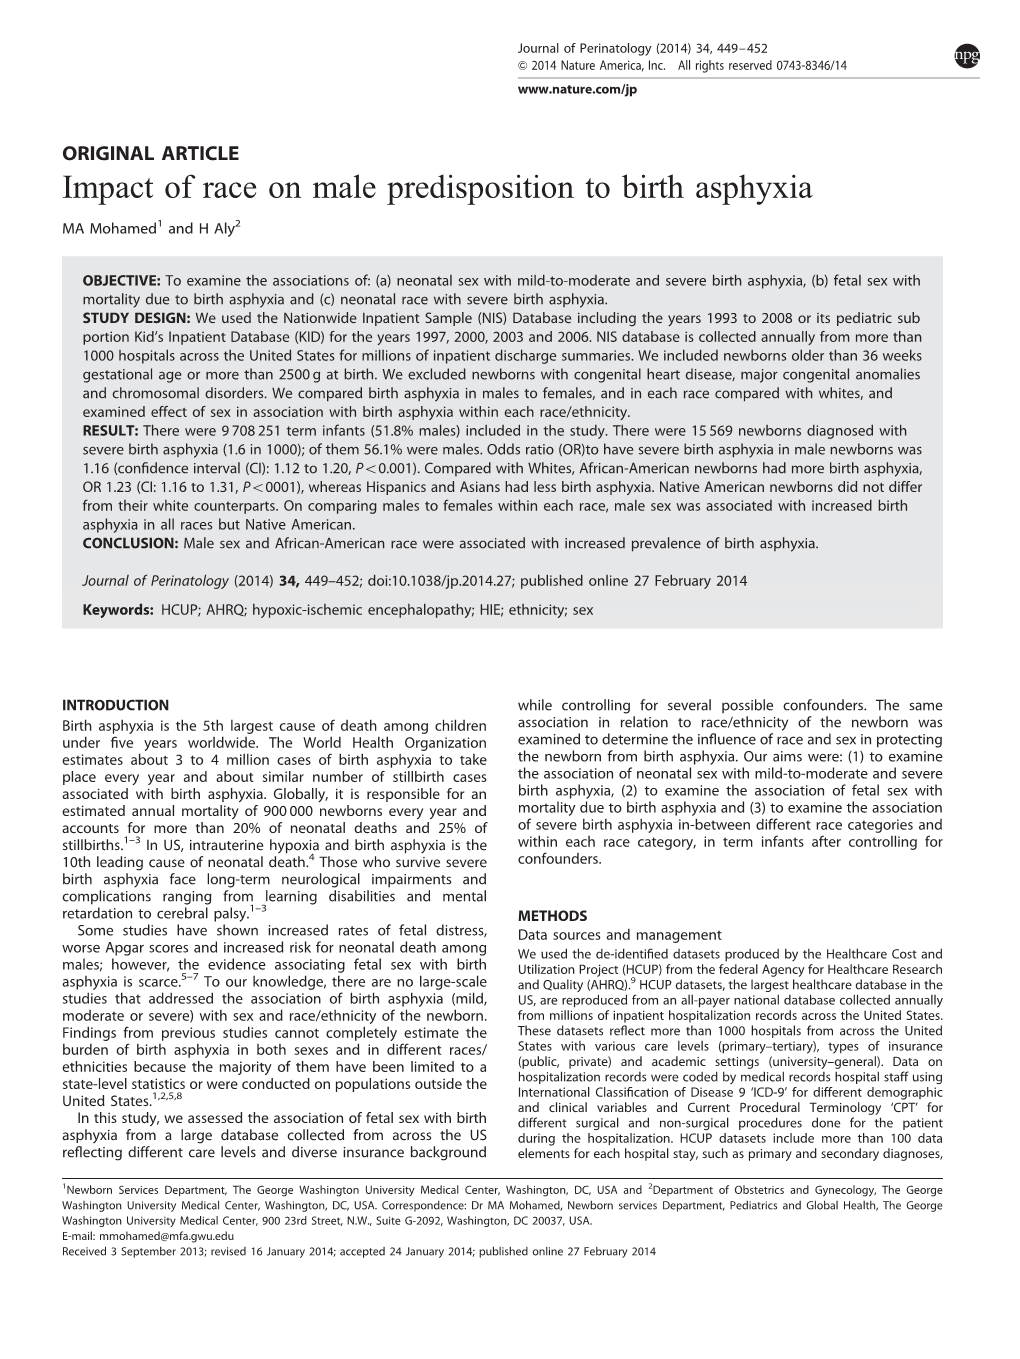 Impact of Race on Male Predisposition to Birth Asphyxia